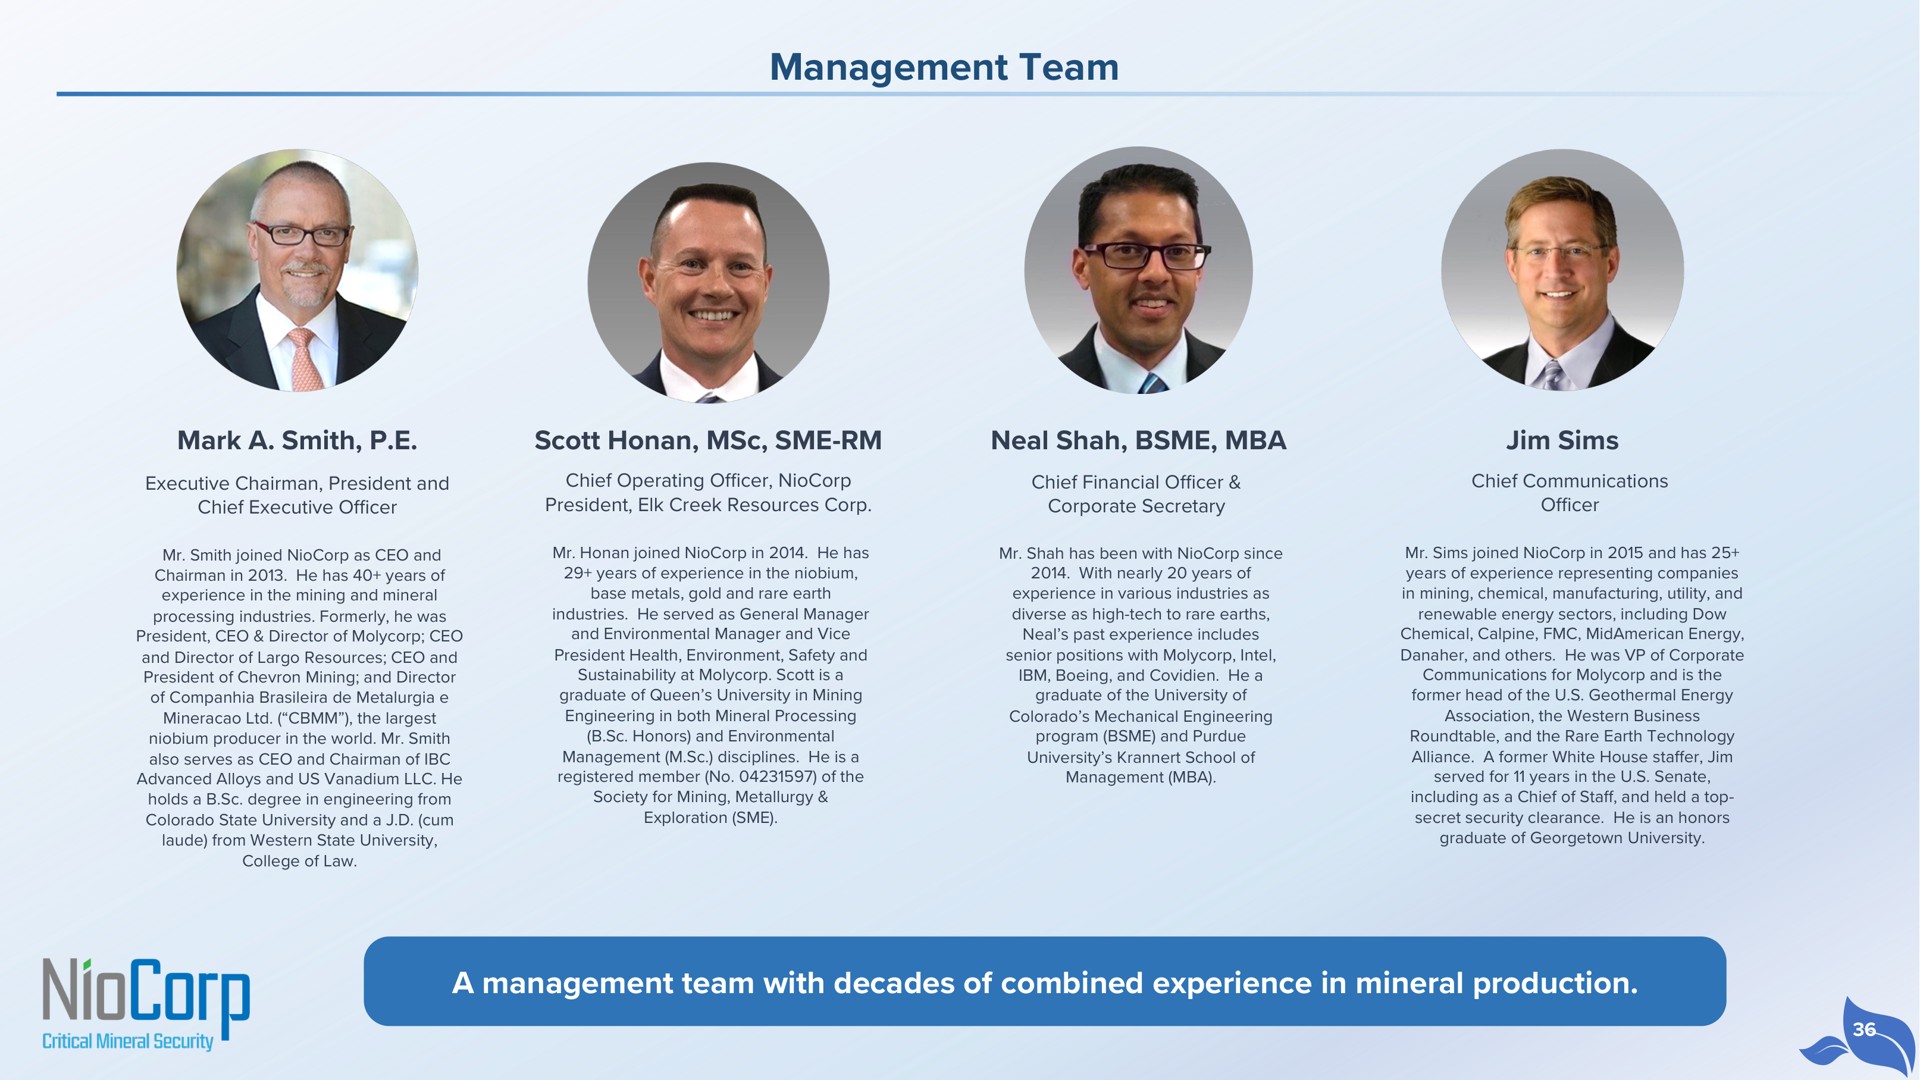 management team a management team with decades of combined experience in mineral production | NioCorp